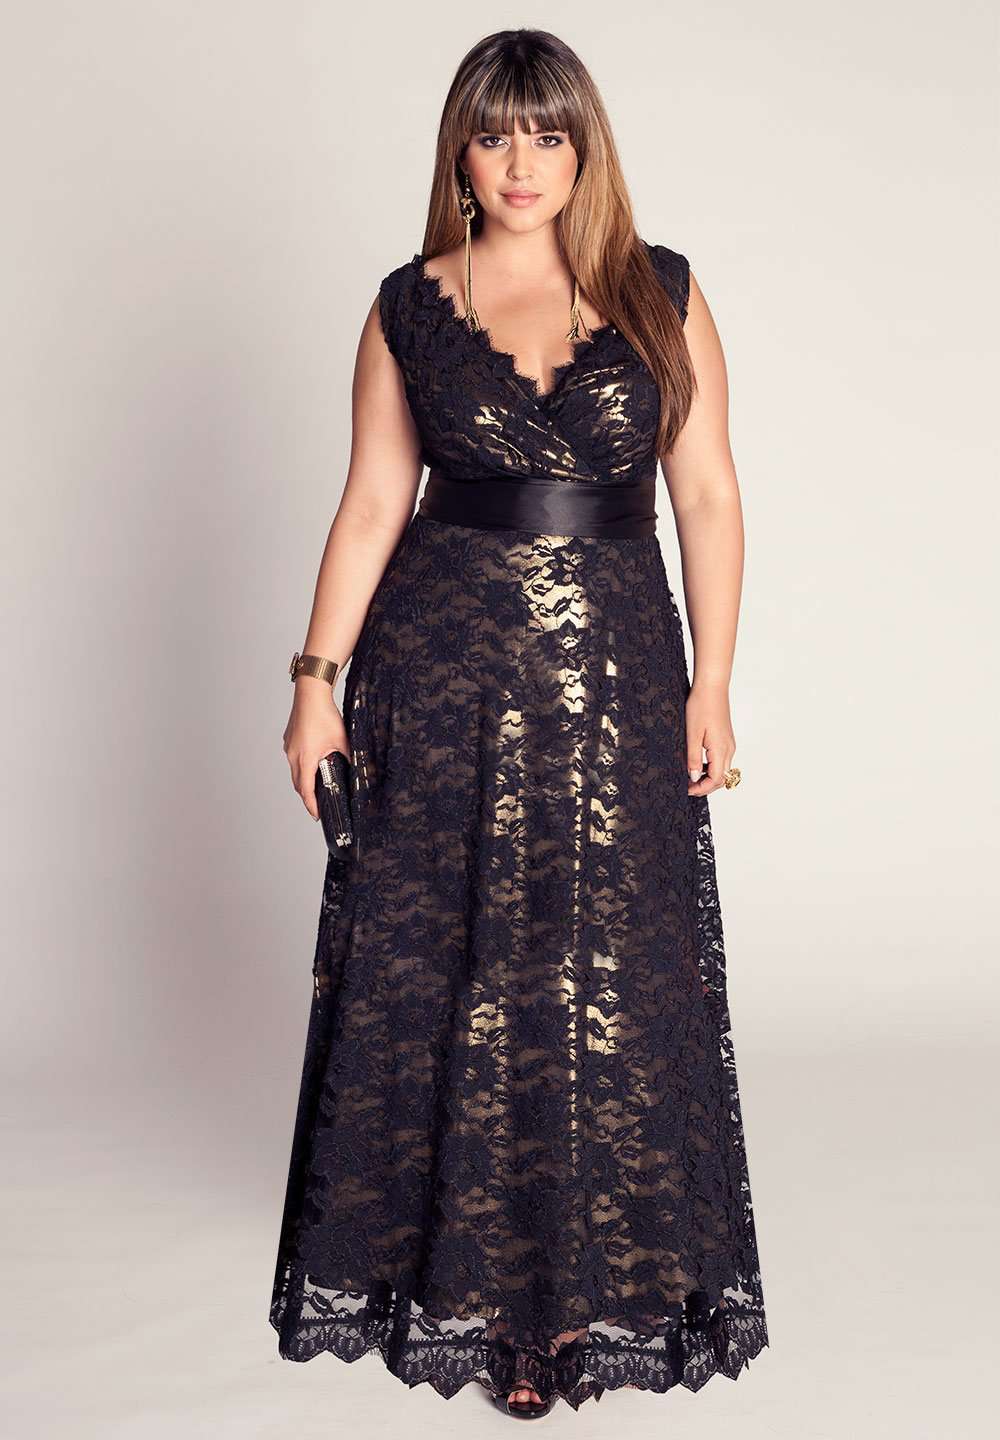 Made to measure plus size lace dress in black